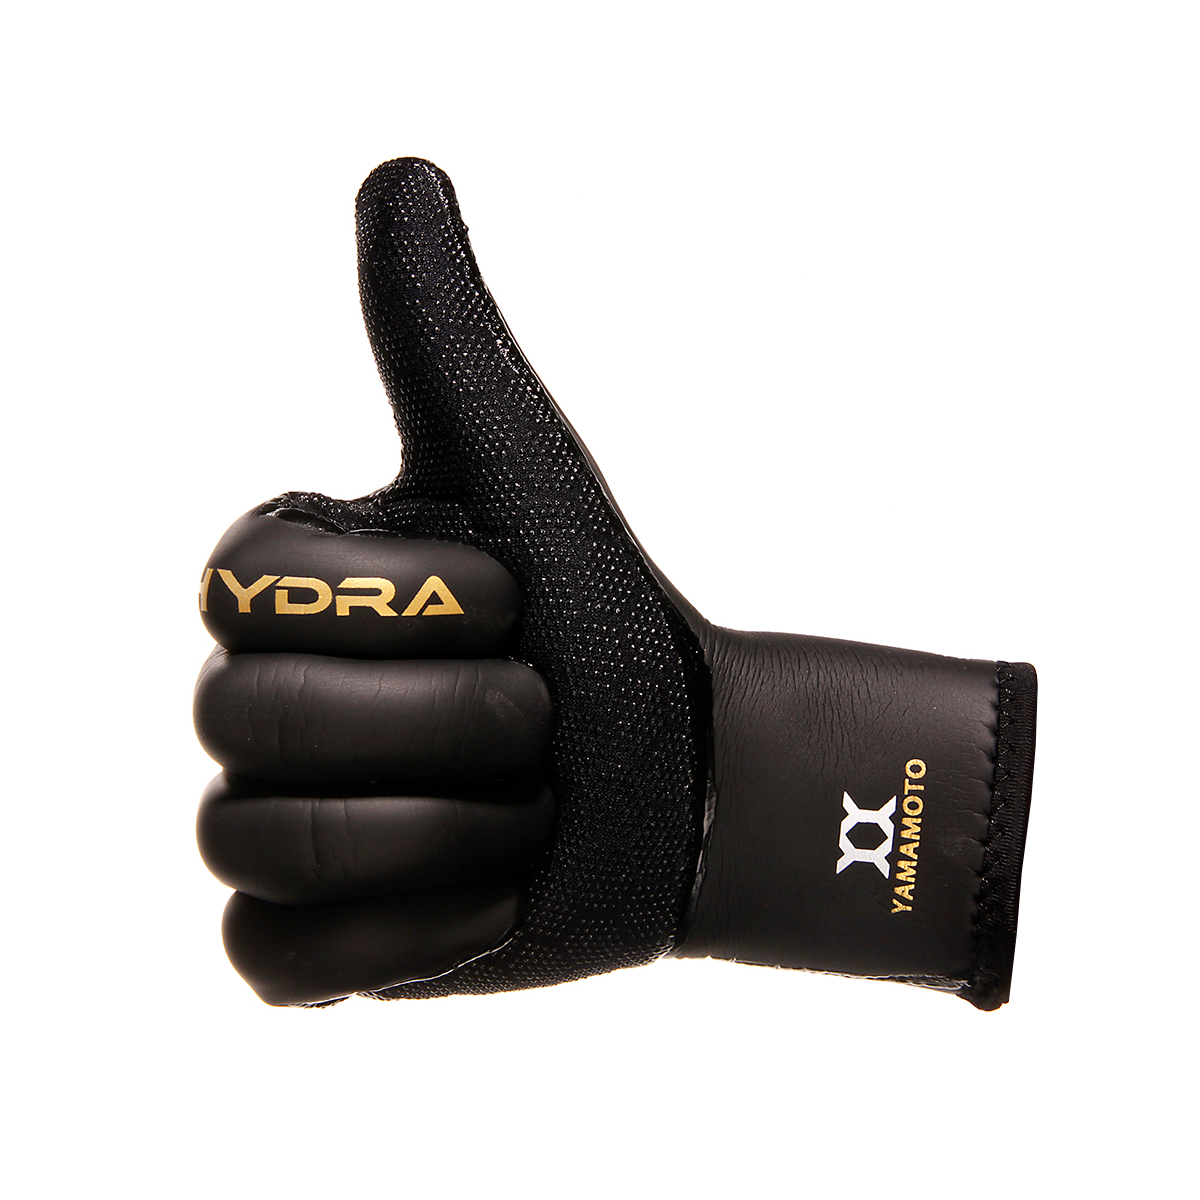 https://www.eurodiveshop.com/media/catalog/product/cache/aef1cd55a9840150c0db65a822948784/h/y/hydra-sport-gloves-spearfishing-freediving-smoothskin-black-6.png